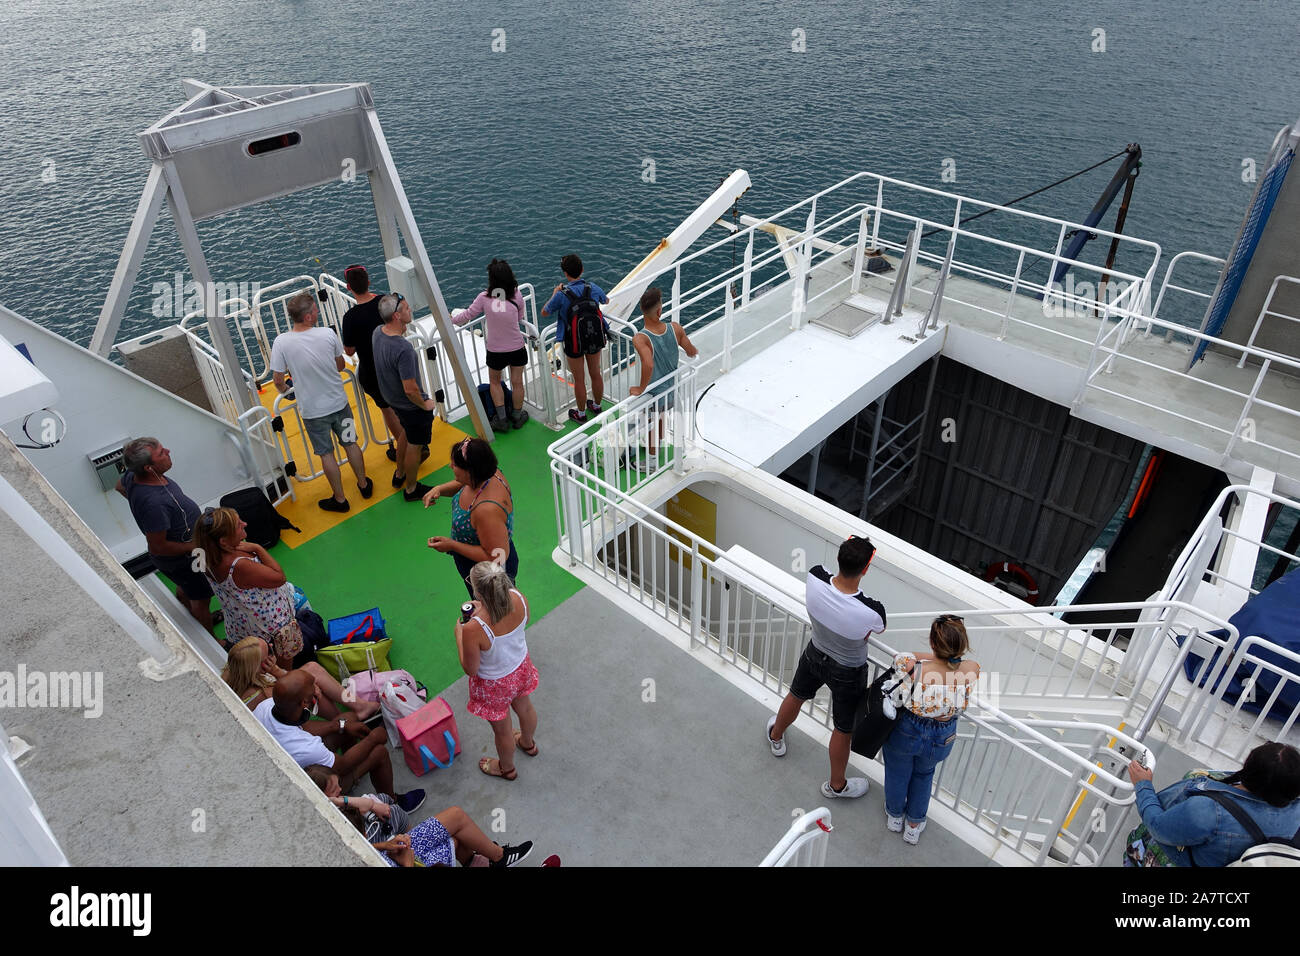 Guernsey 25 July 2019: Foot passengers waiting to disembark from a Condor ferry which is arriving in Guernsey Stock Photo